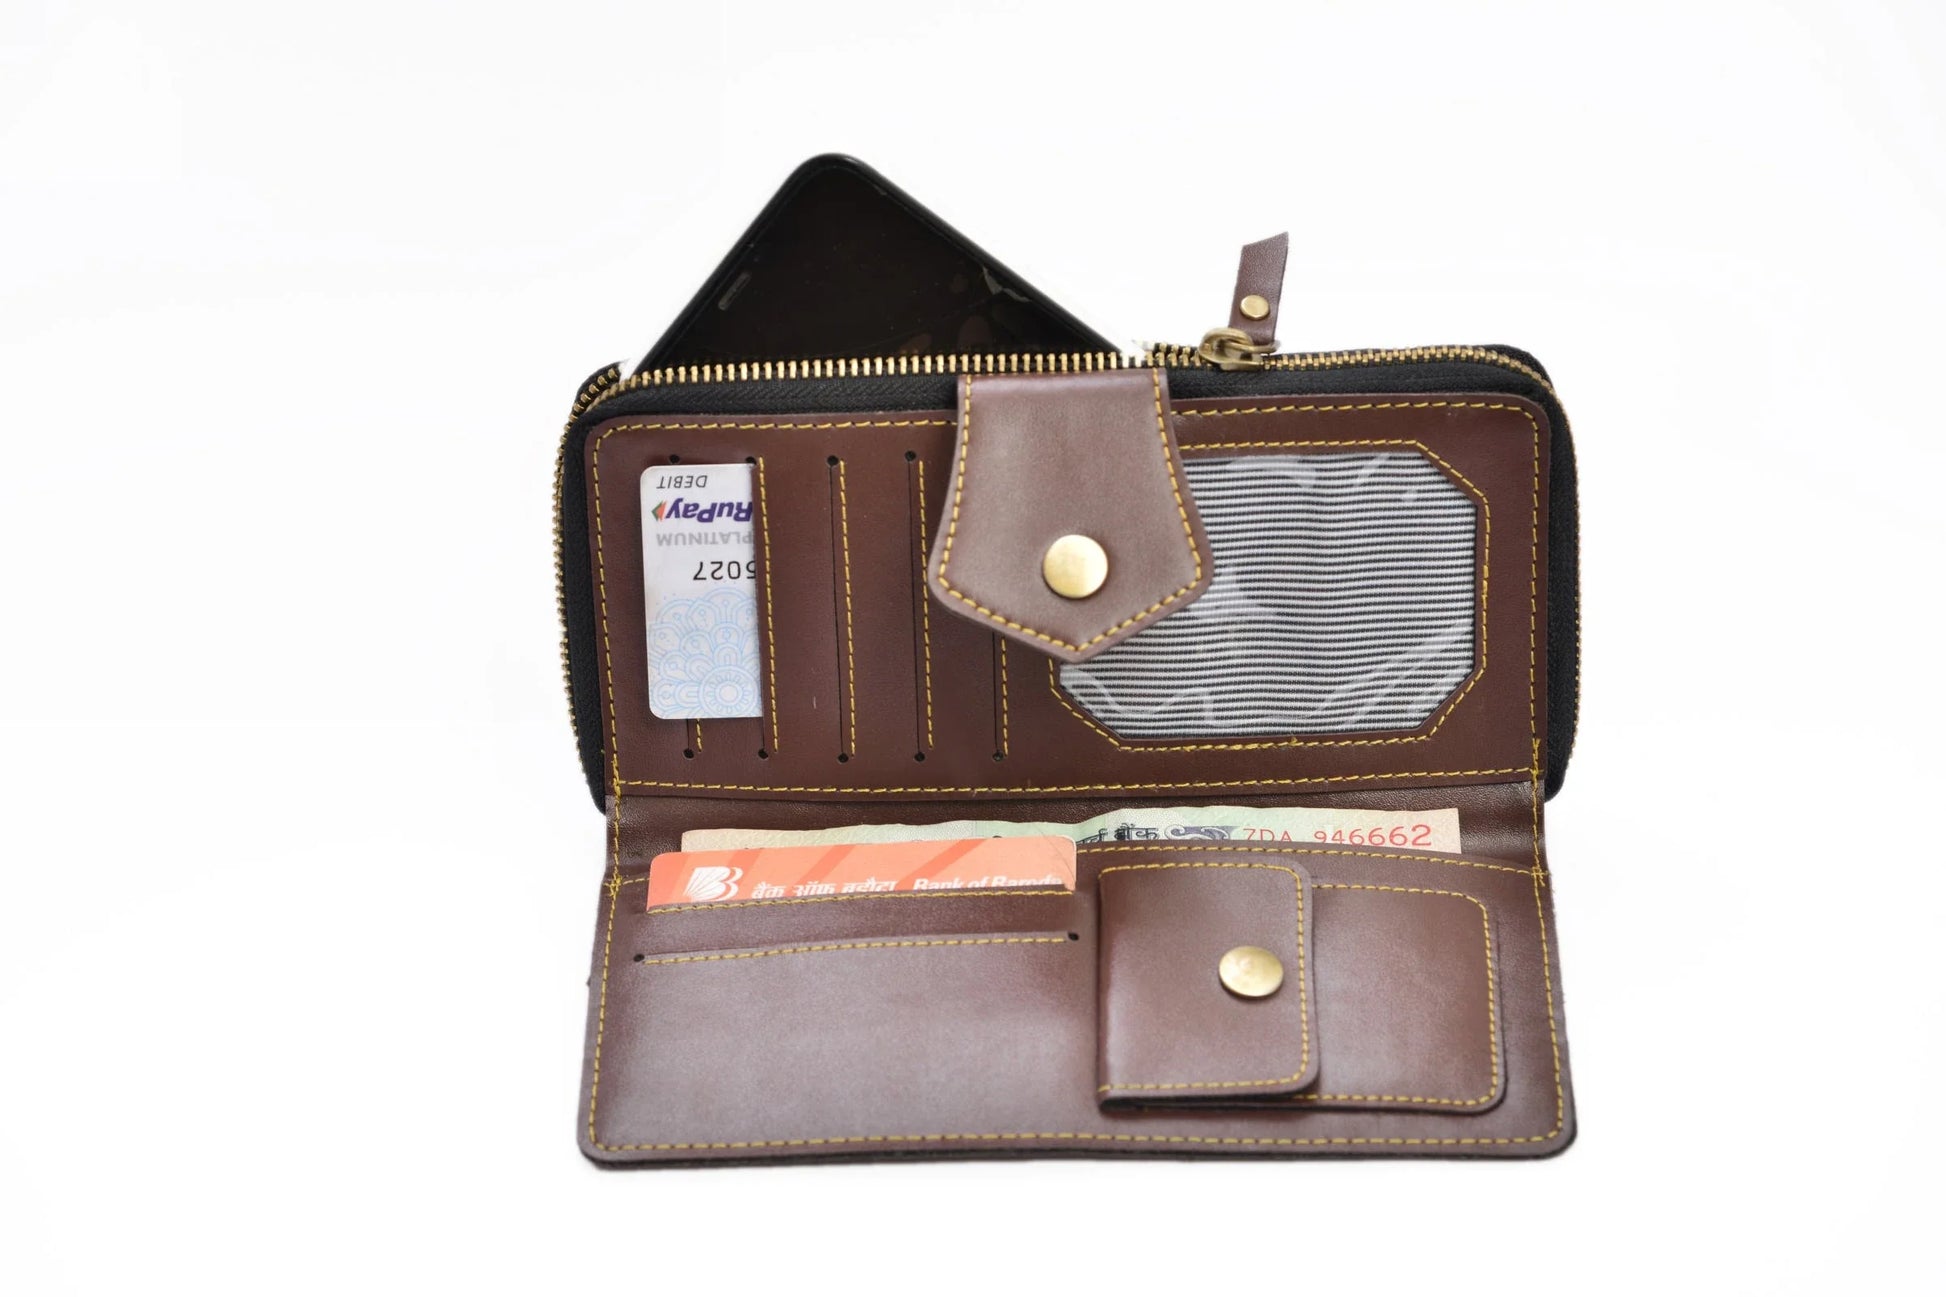 inside or open view of zip around lady wallet- brown